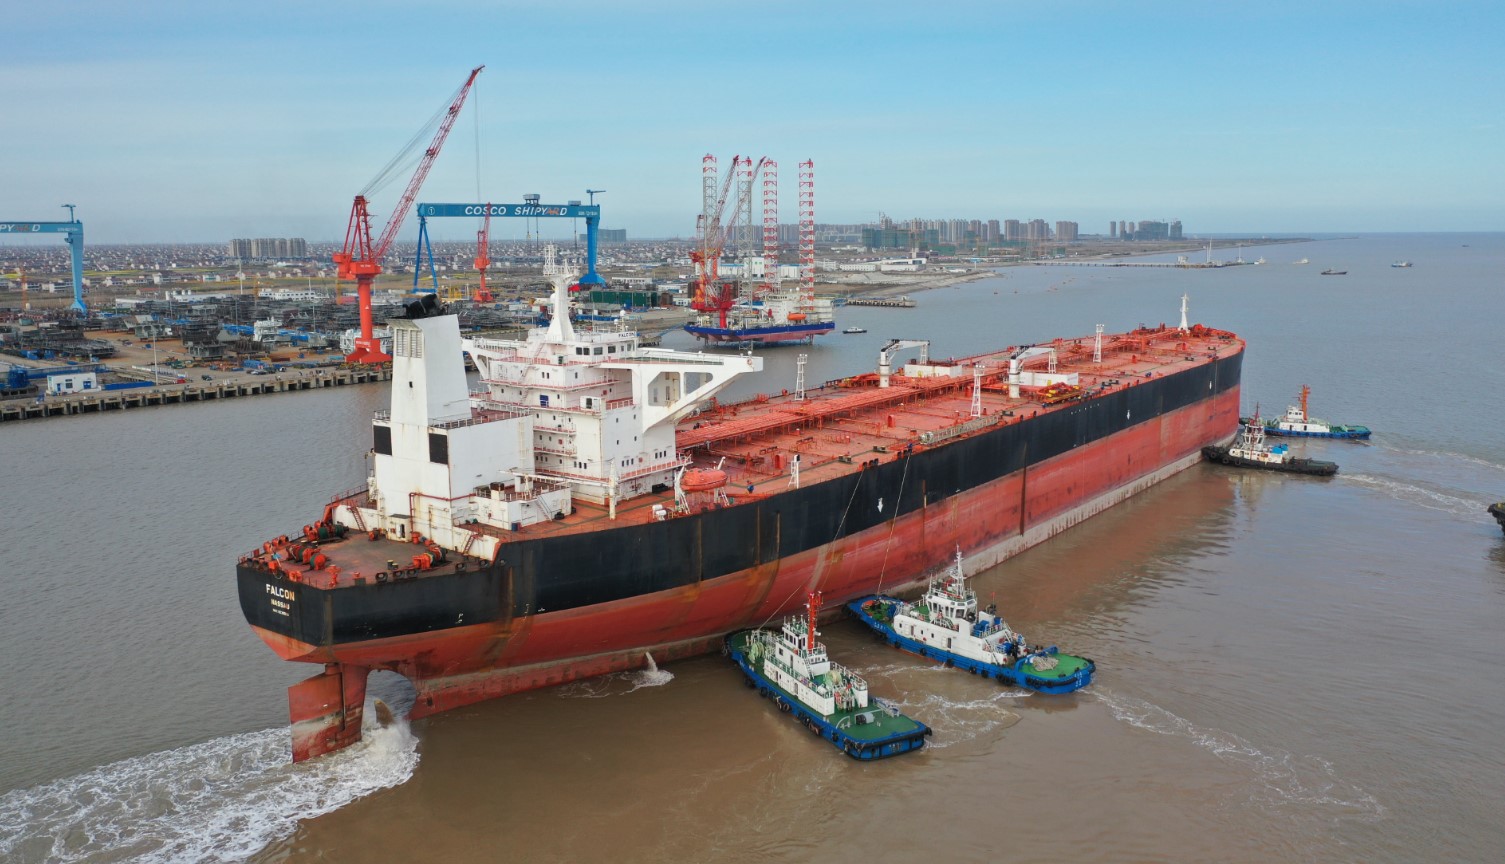 Tanker set for conversion into FPSO Anna Nery by Yinson